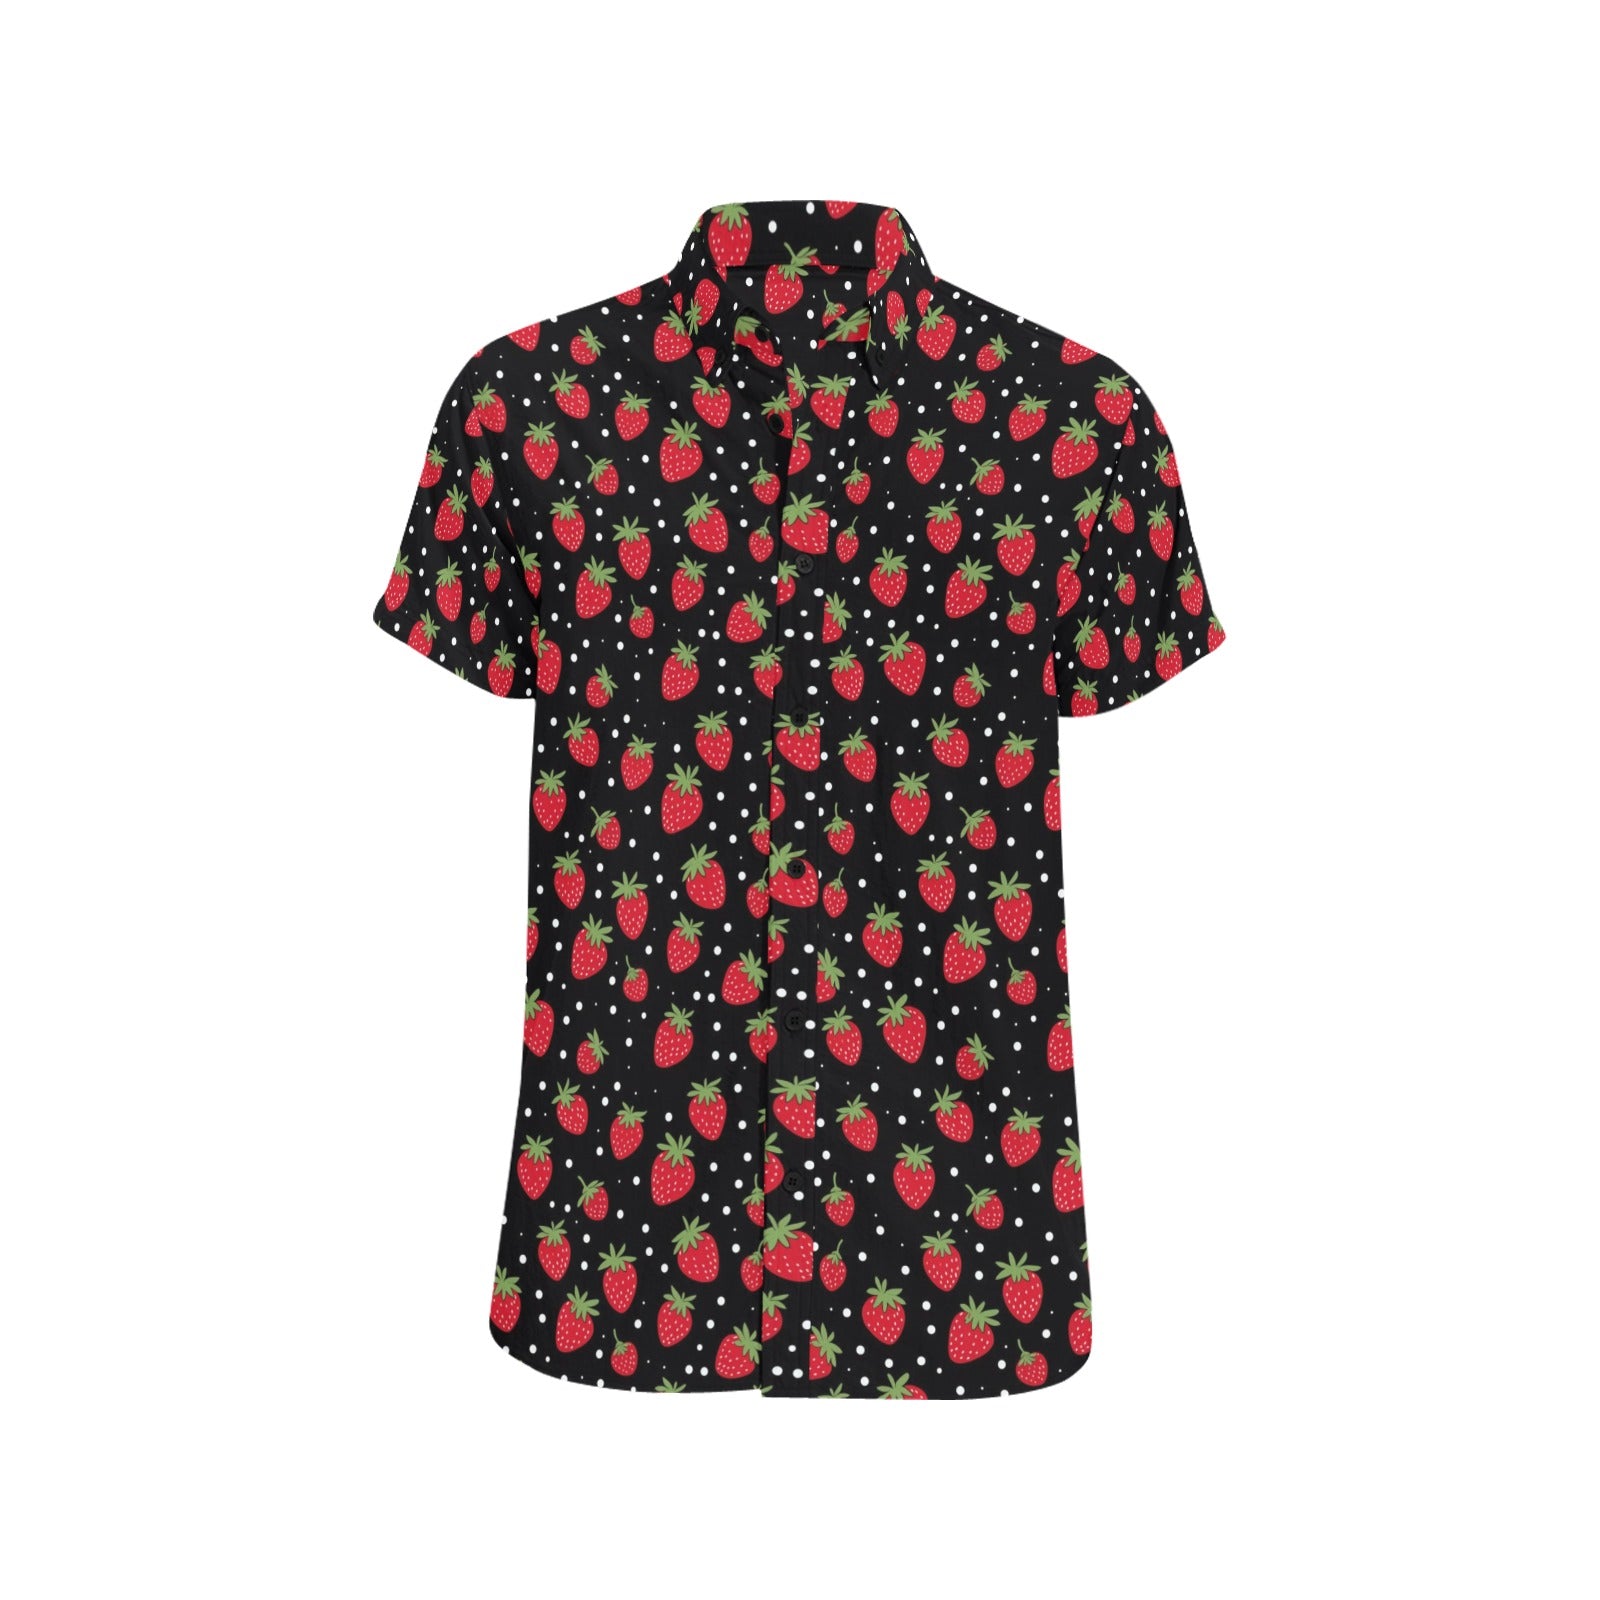 Strawberry Print Men Button Down Shirt, Short Sleeve Up Red Fruit Black Casual Buttoned Down Guys Summer Dress Shirt Plus Size Collared Starcove Fashion